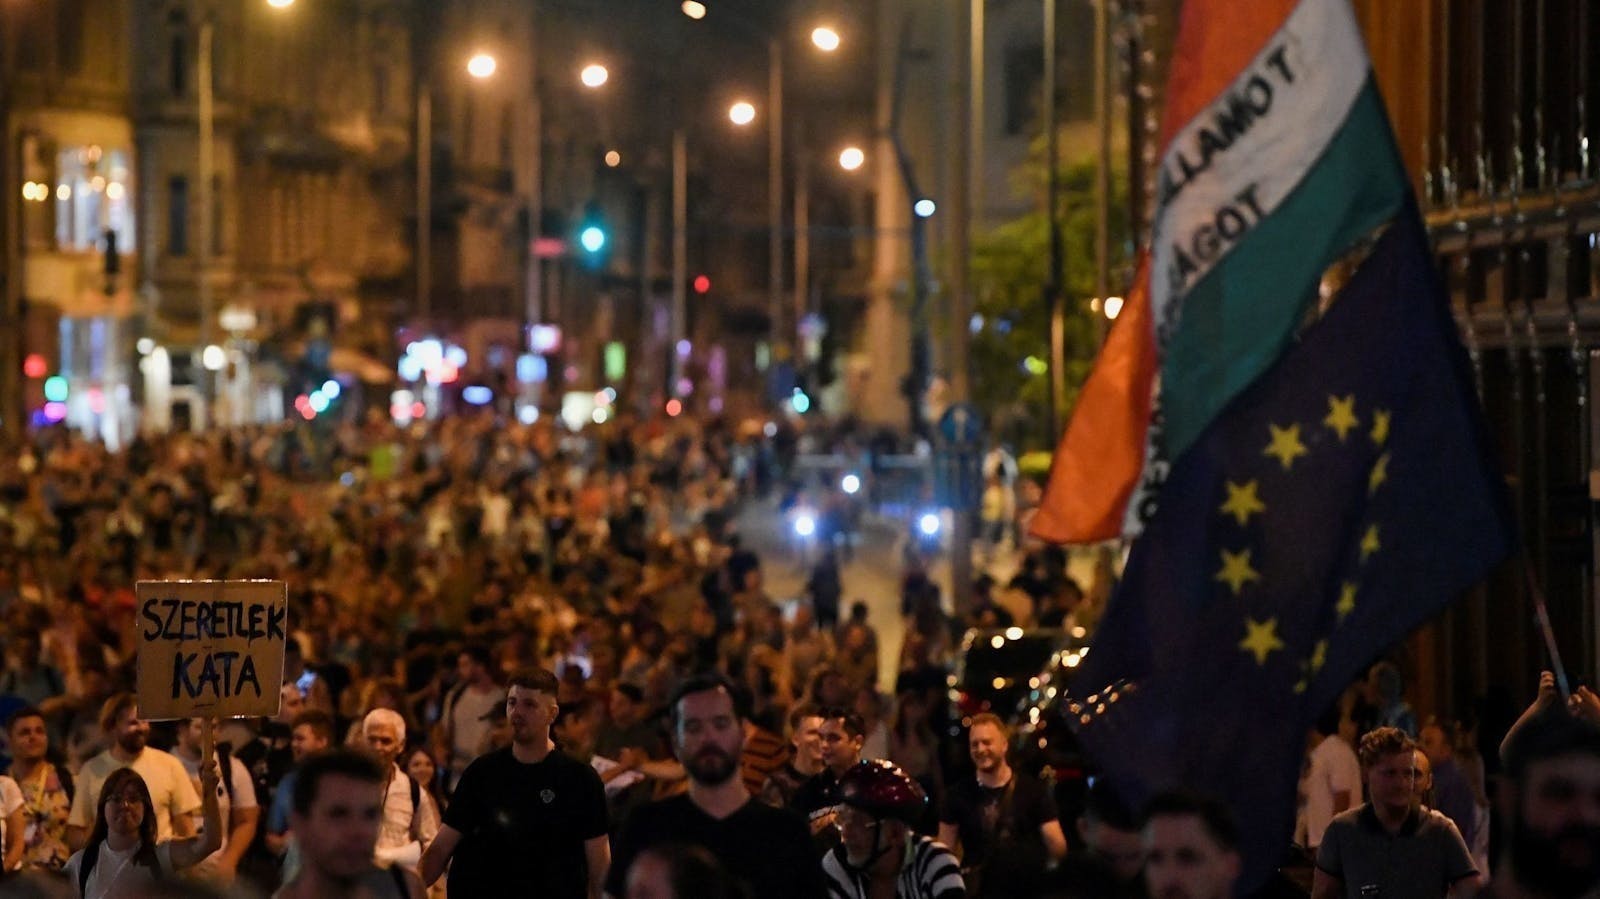 People marching in Budapest at night with Hungarian and EU flags